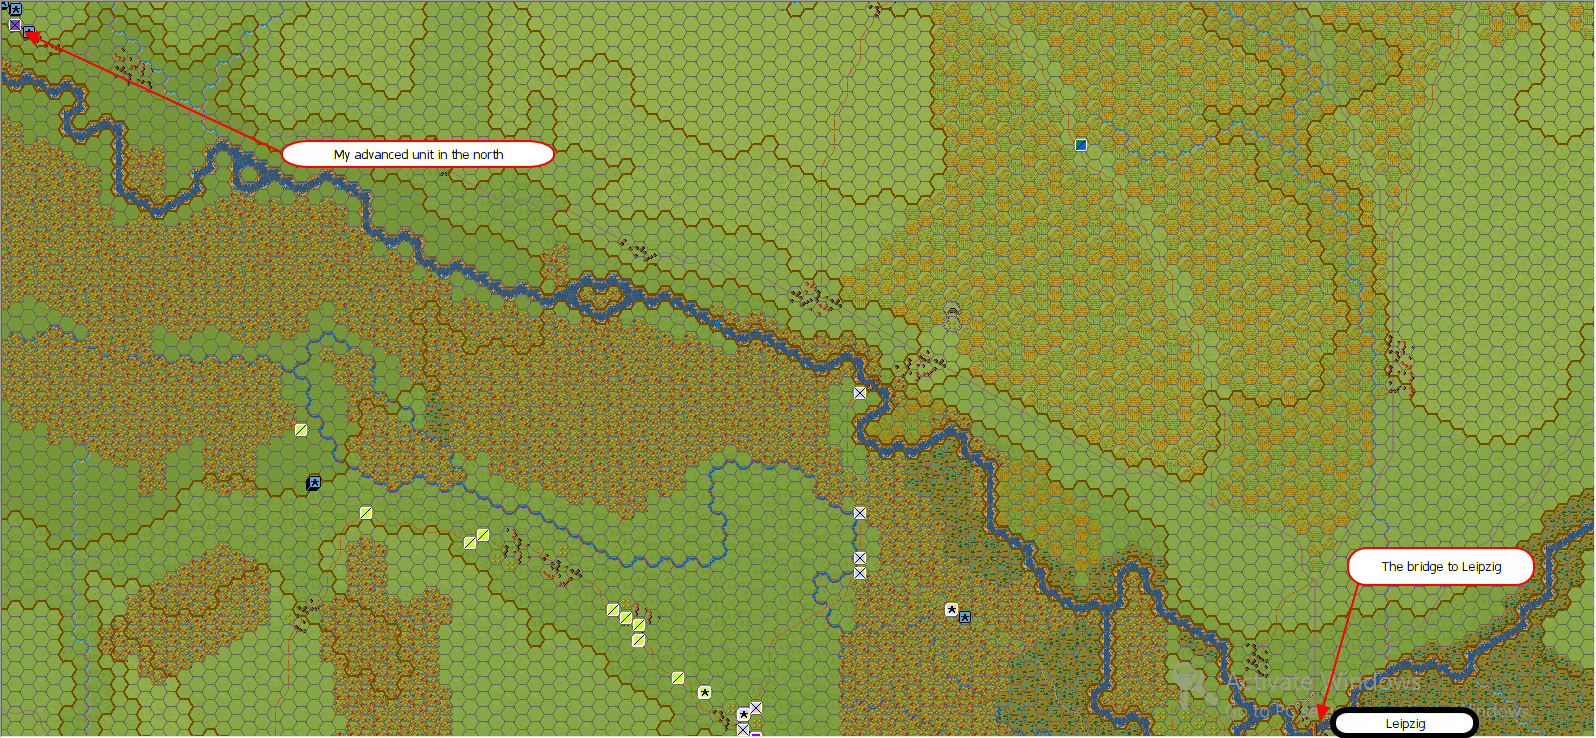 [Image: T44%20The%20Prussians%20and%20Leipzig%20...%20map.gif]